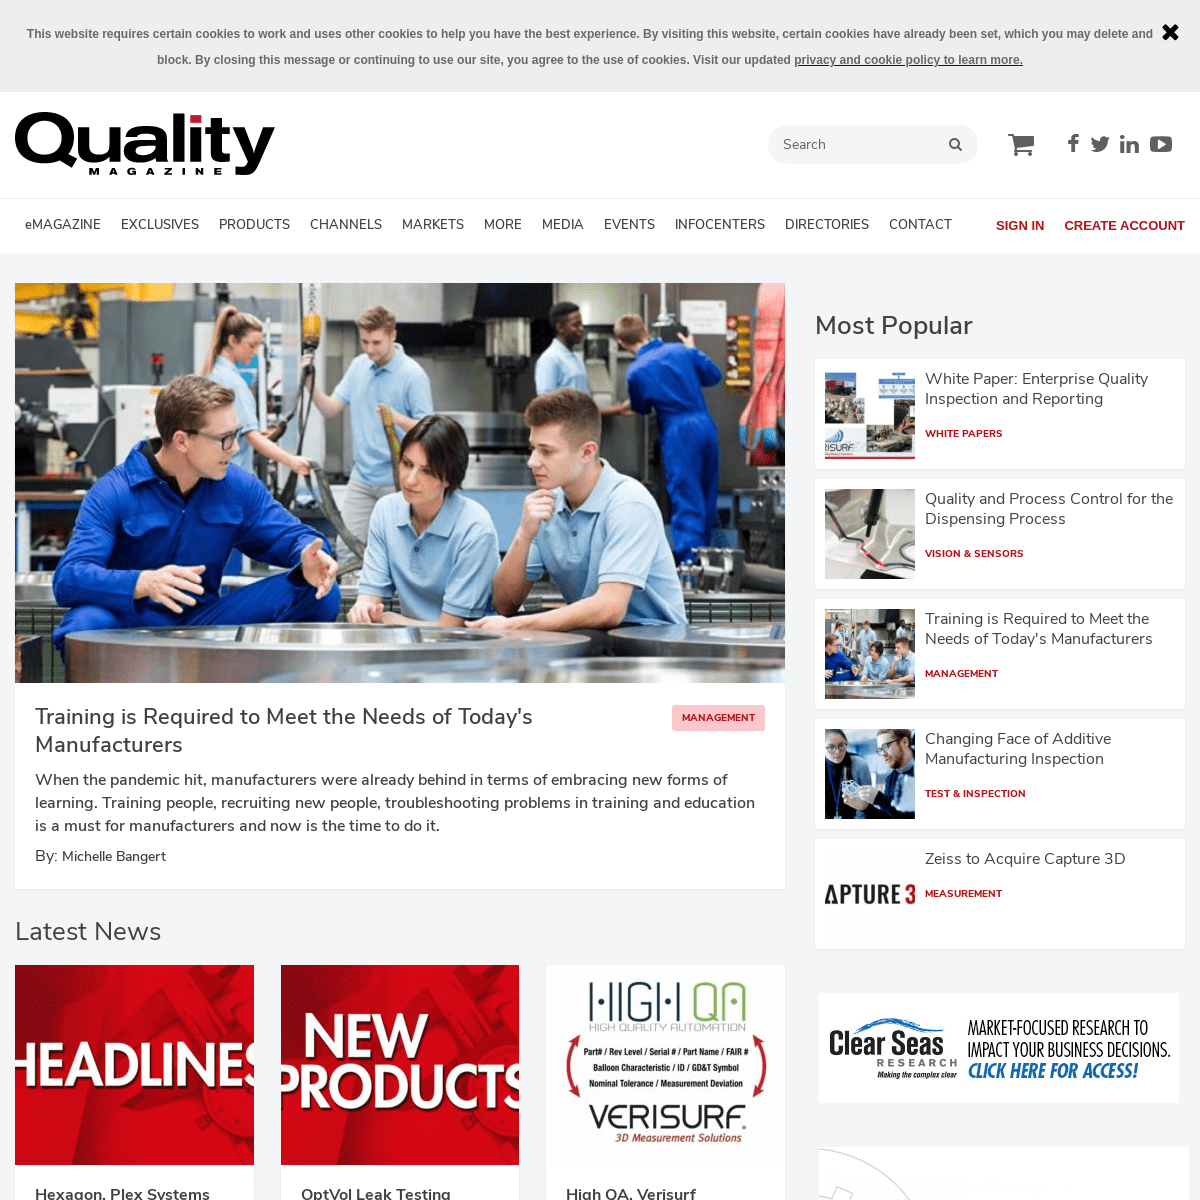 A complete backup of https://qualitymag.com